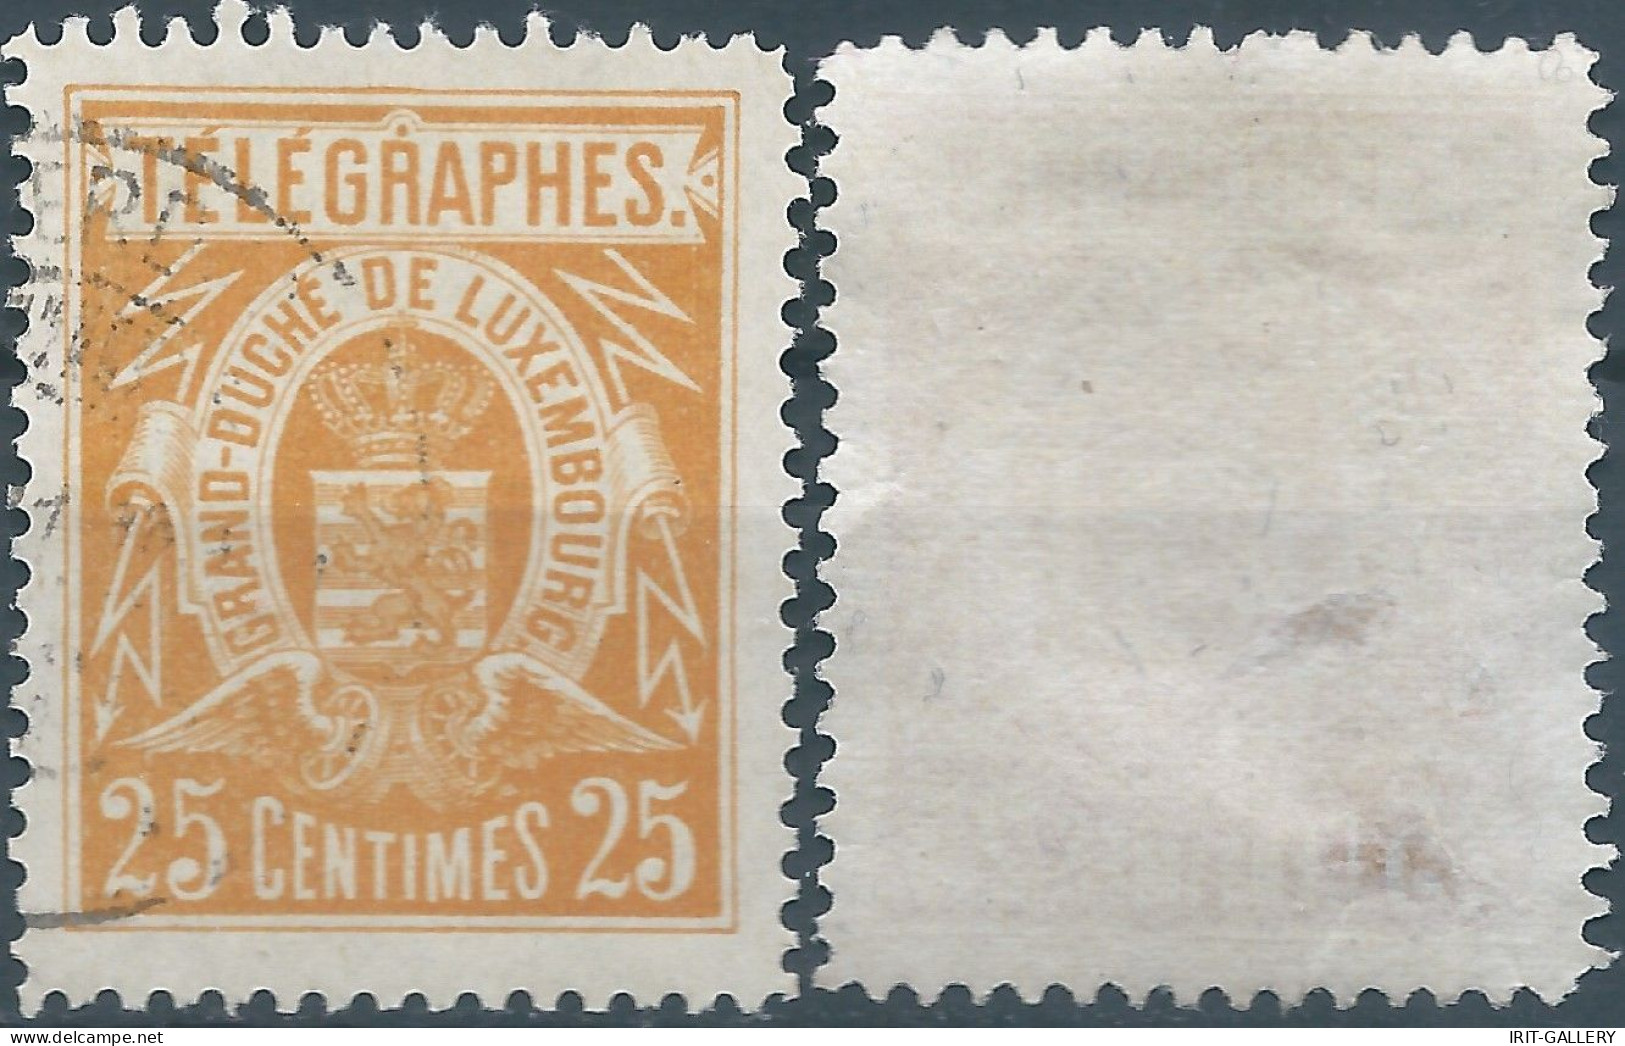 Lussemburgo - Luxembourg -TELEGRAPHES 1883 Telegraph Stamps,25C,Used & Not Cancelled, Mint - Telégrafos